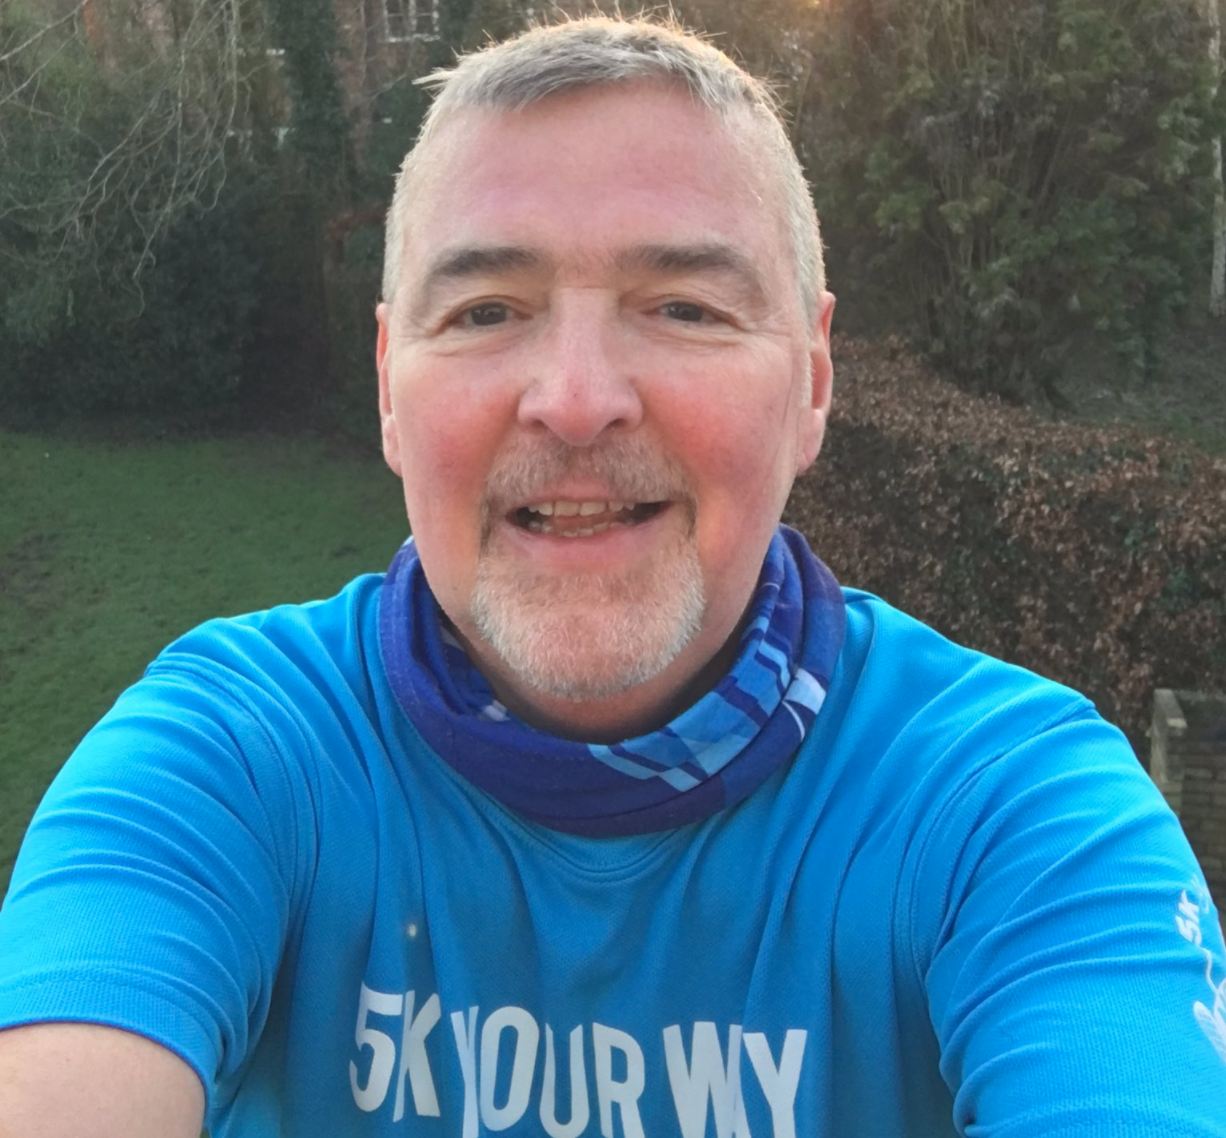 This terminally ill Altrincham man is running 5k every day in 2022 to raise money for charity, The Manc